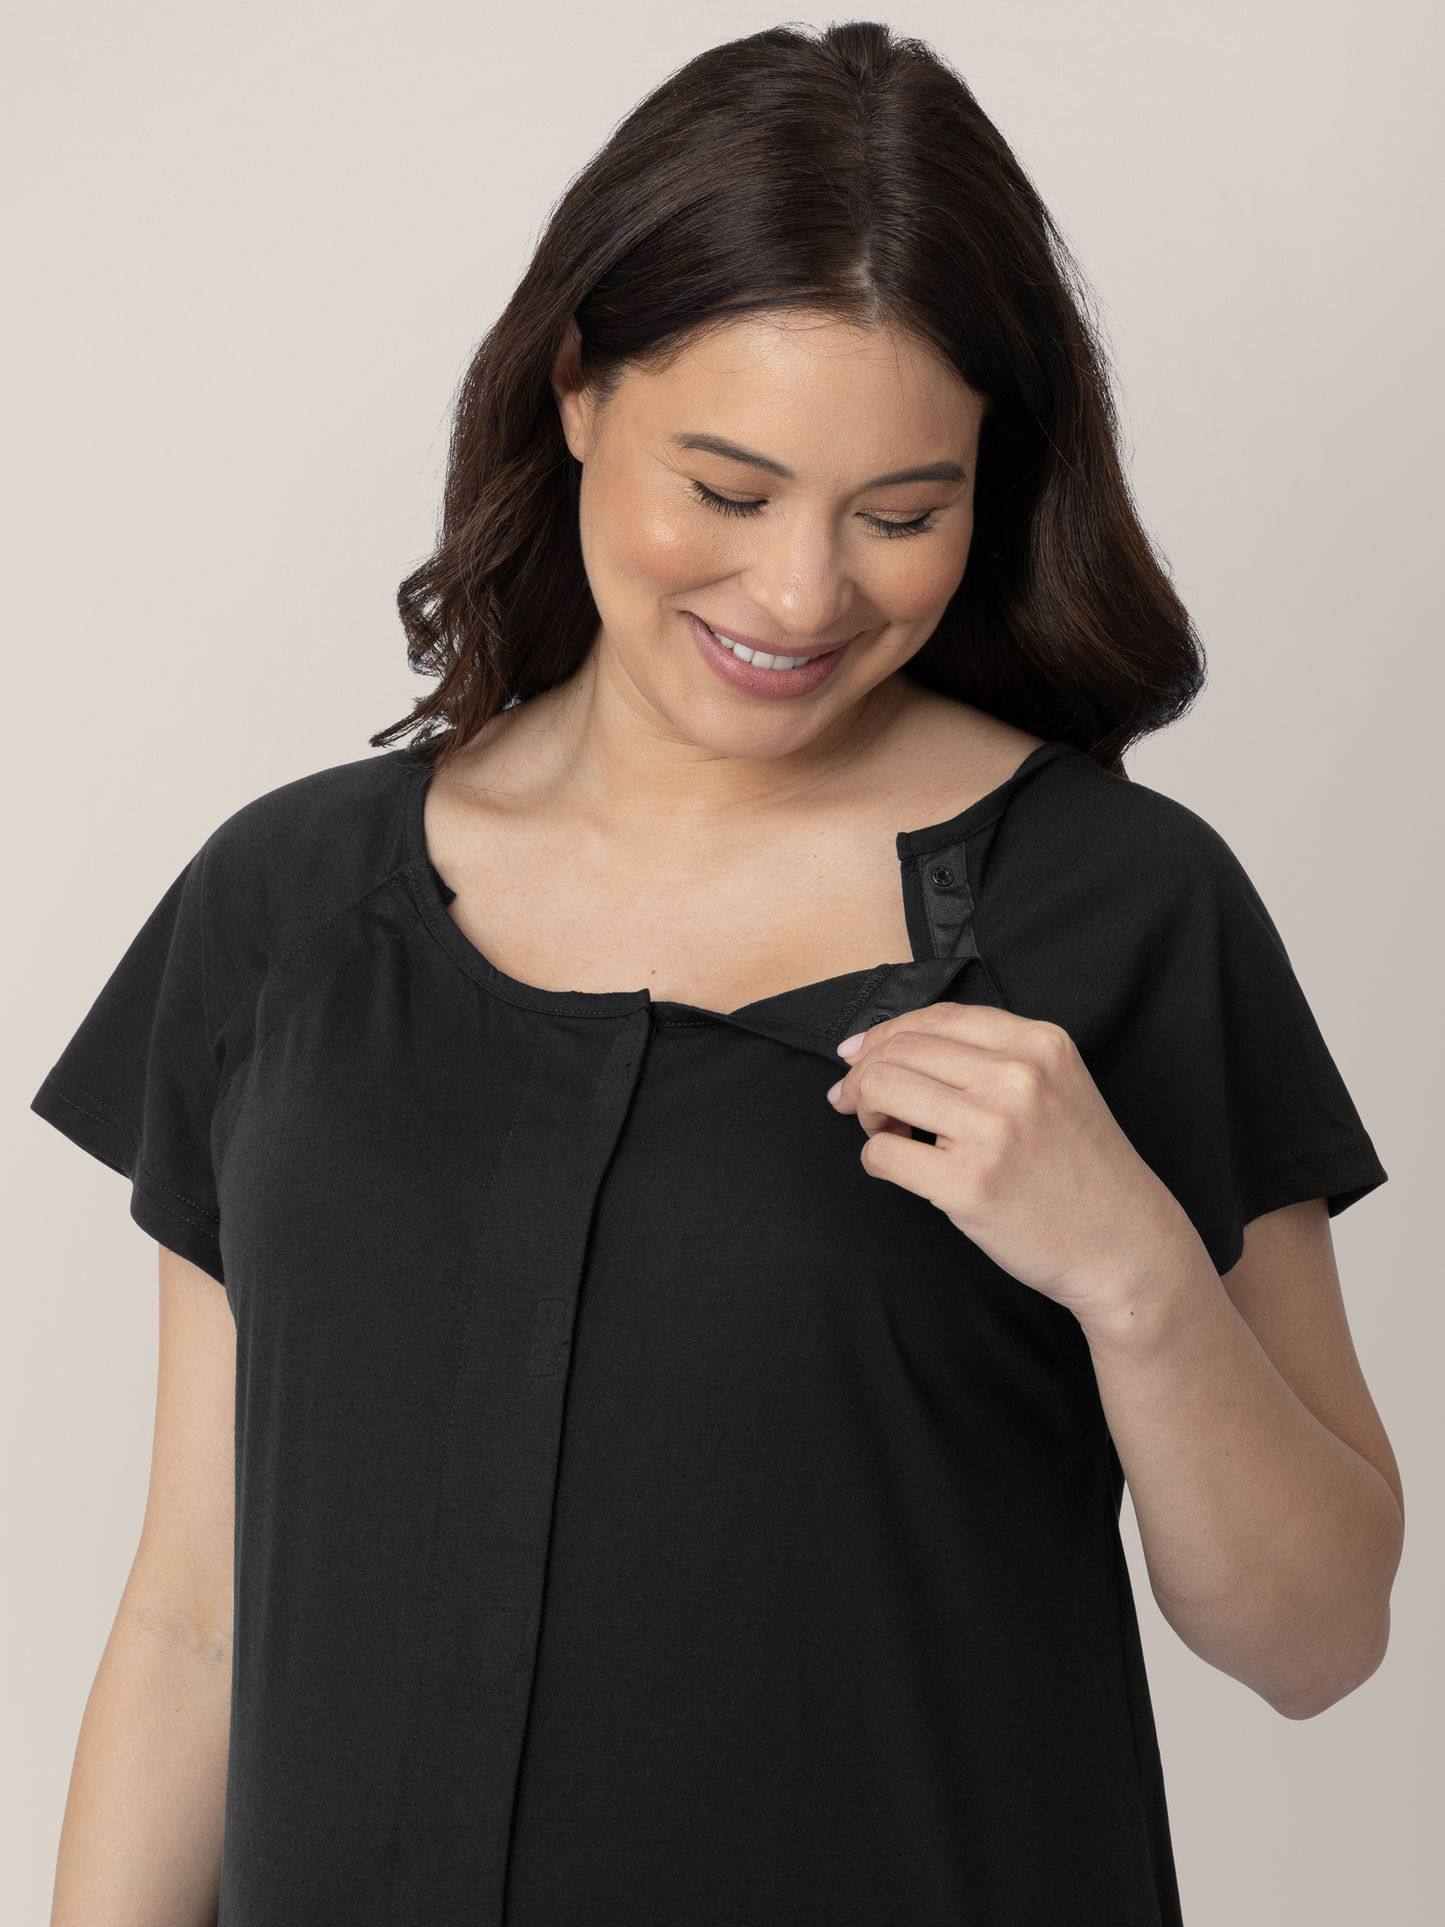 Pregnant model showing the easy clip down nursing and labor access on the Universal Labor & Delivery Gown in Black